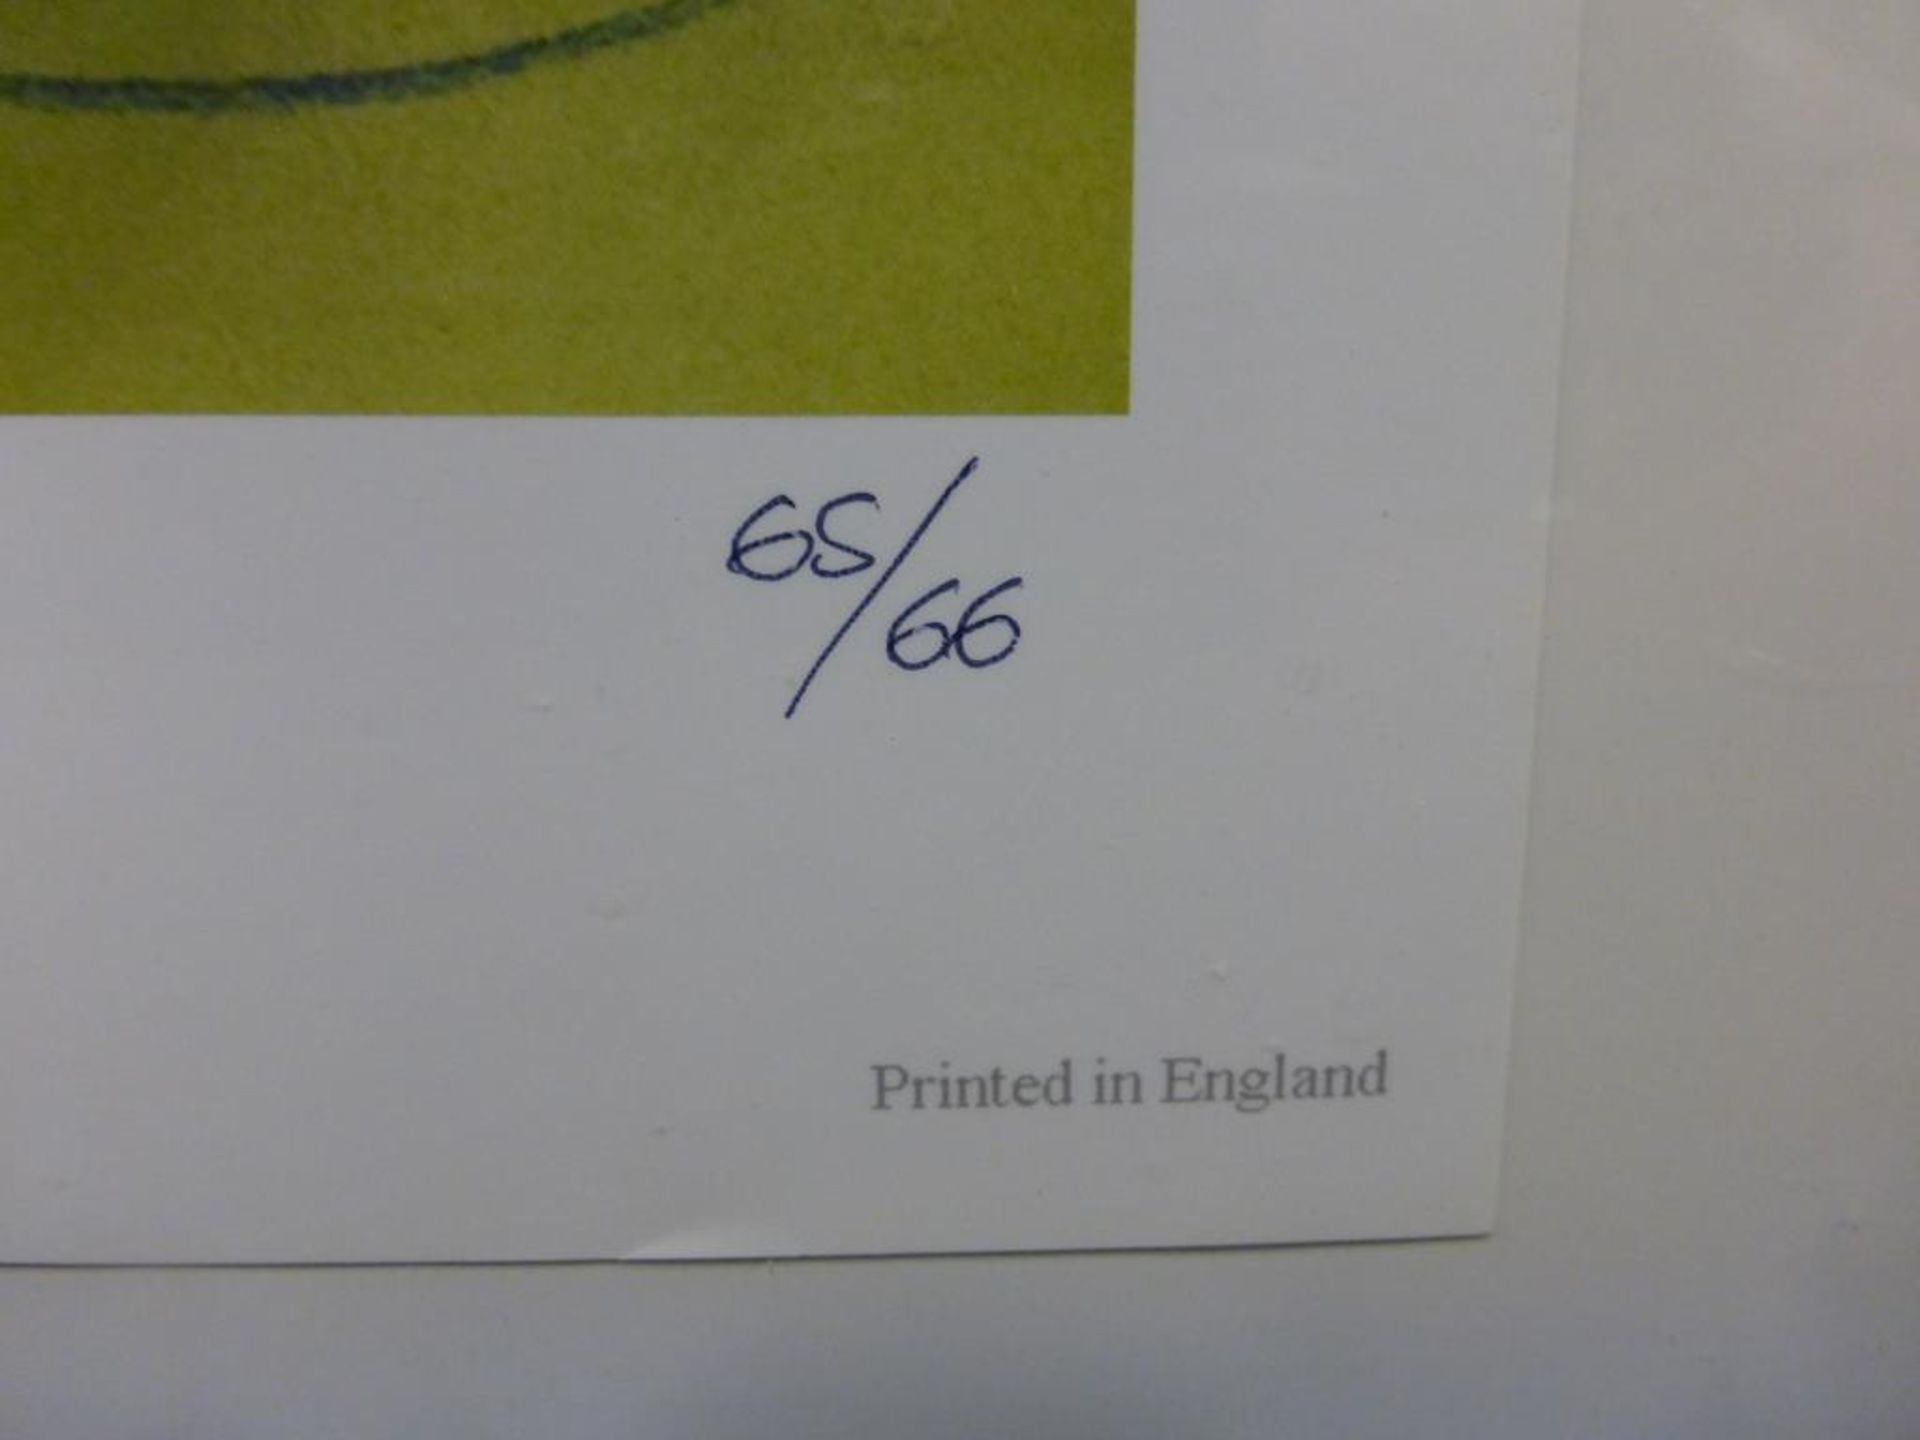 Sports Autographs: Ray Wilson "1966 World Cup Winning Legend" - Image 3 of 6